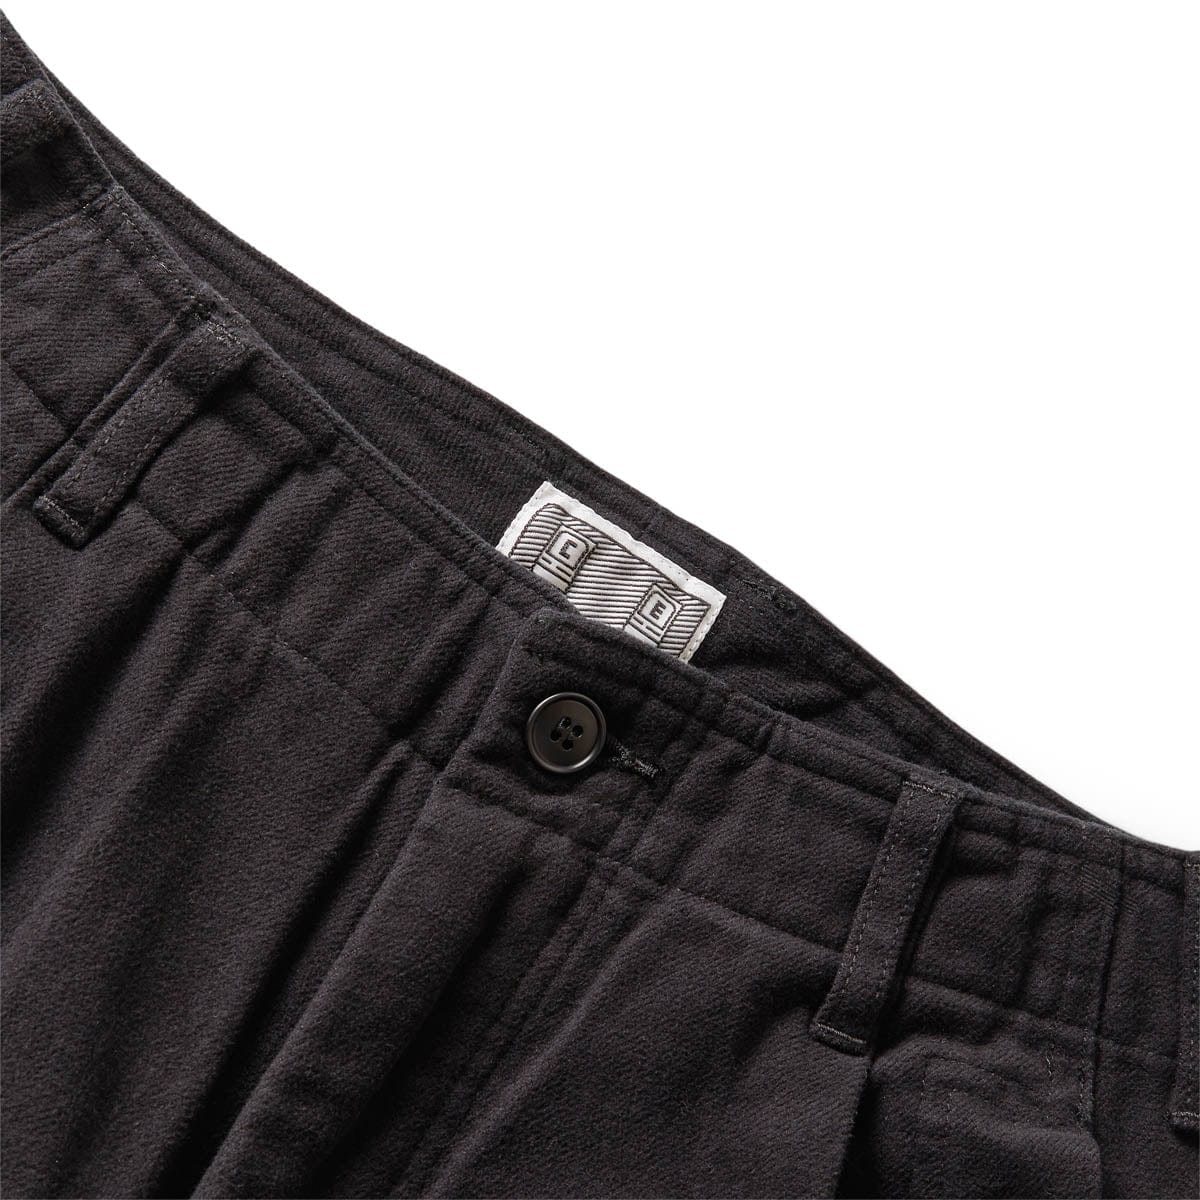 Cav Empt Bottoms BRUSHED COTTON CASUAL PANTS